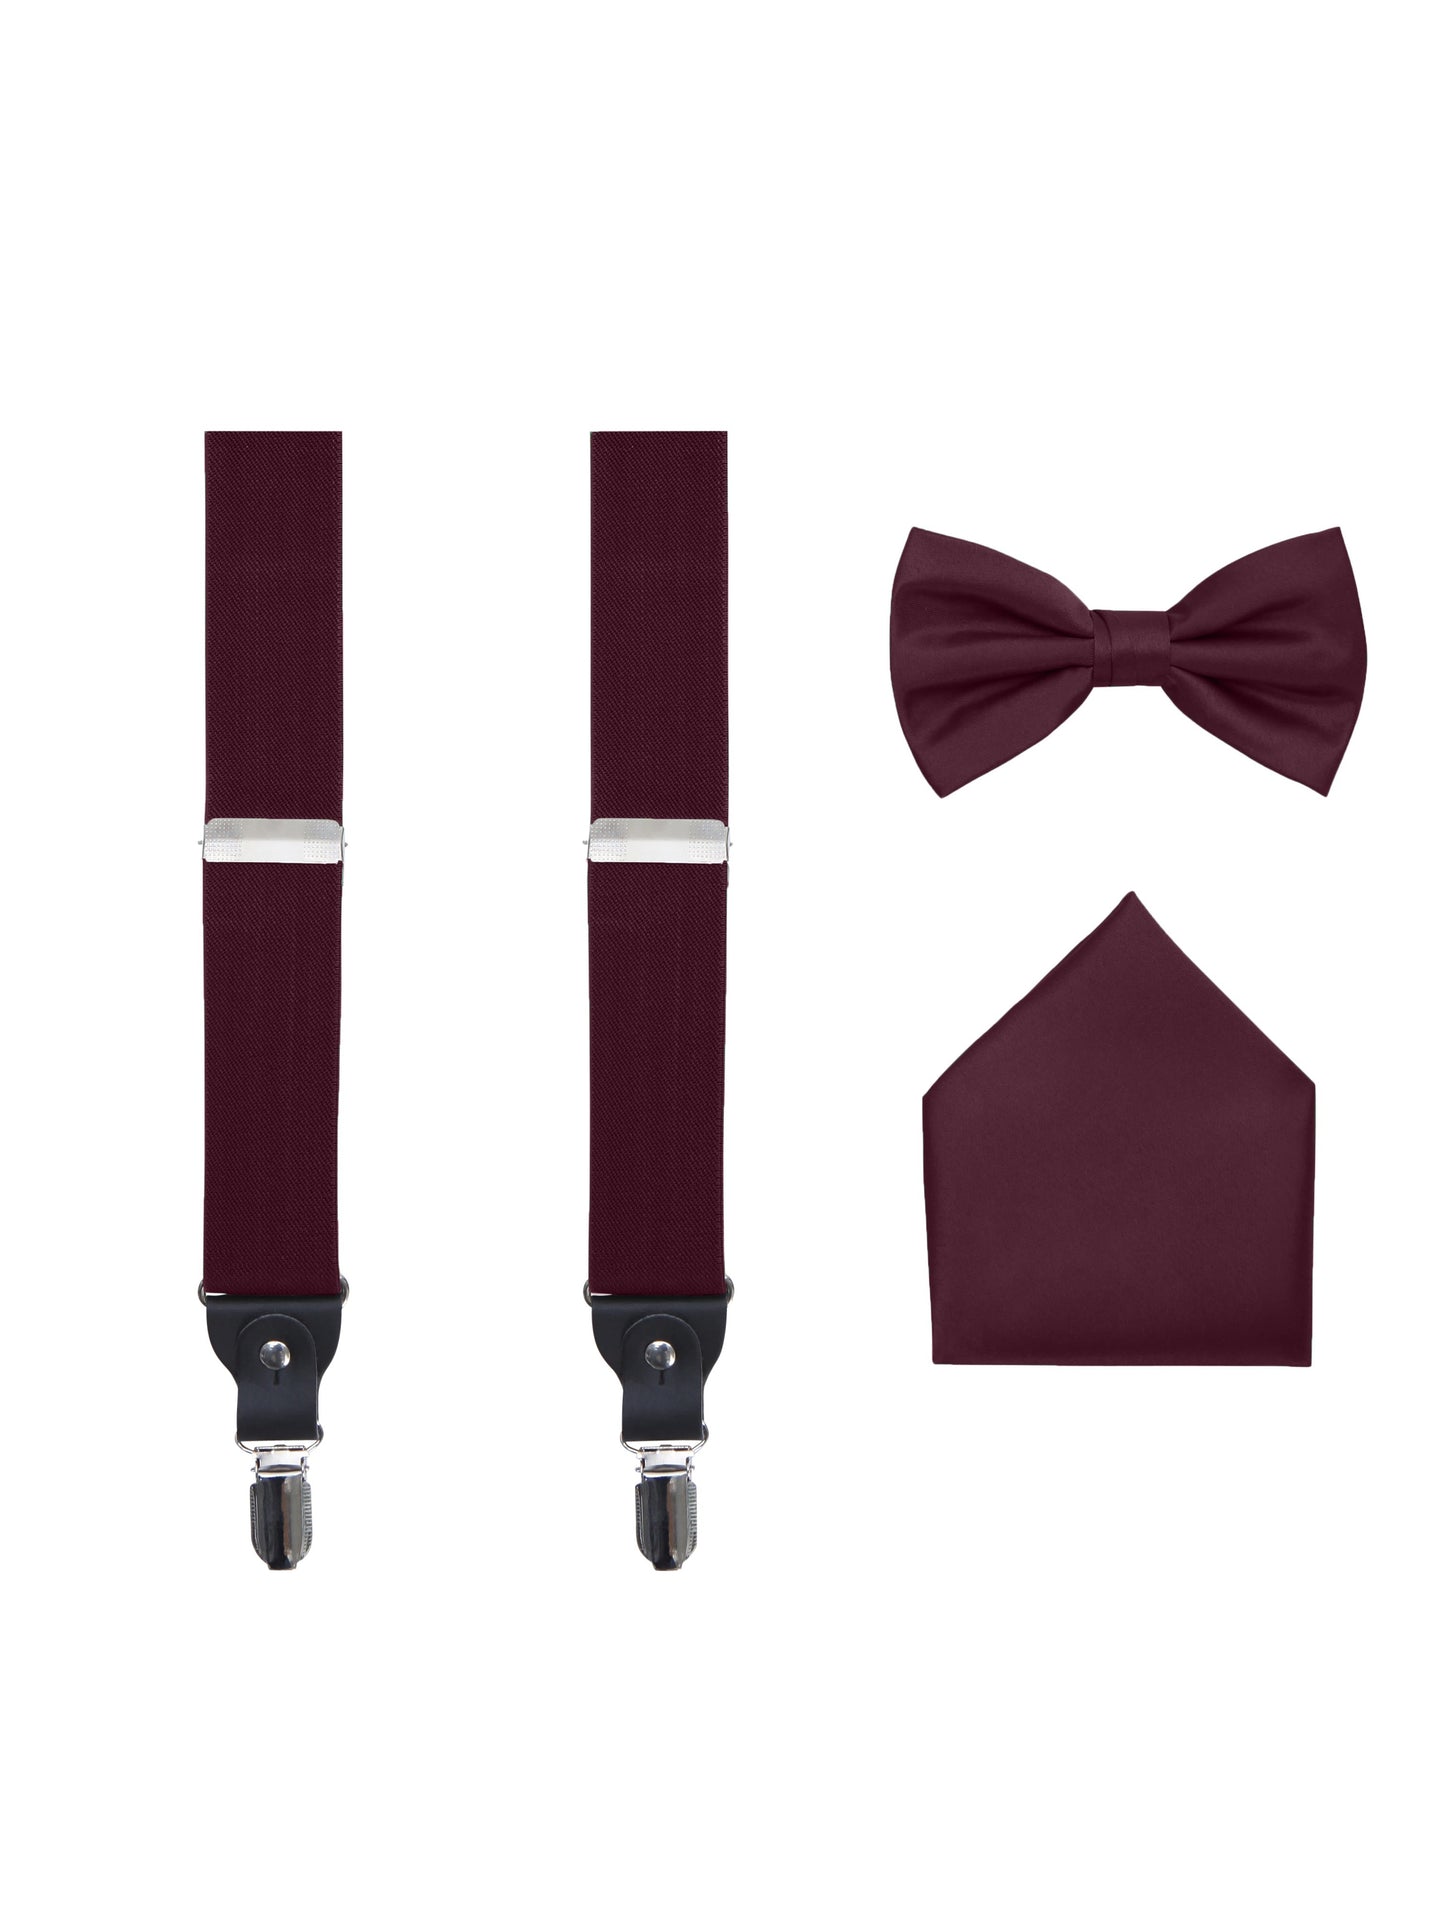 S.H. Churchill & Co. Men's 3 Piece Merlot Suspender Set - Includes Suspenders, Matching Bow Tie, Pocket Hanky and Gift Box